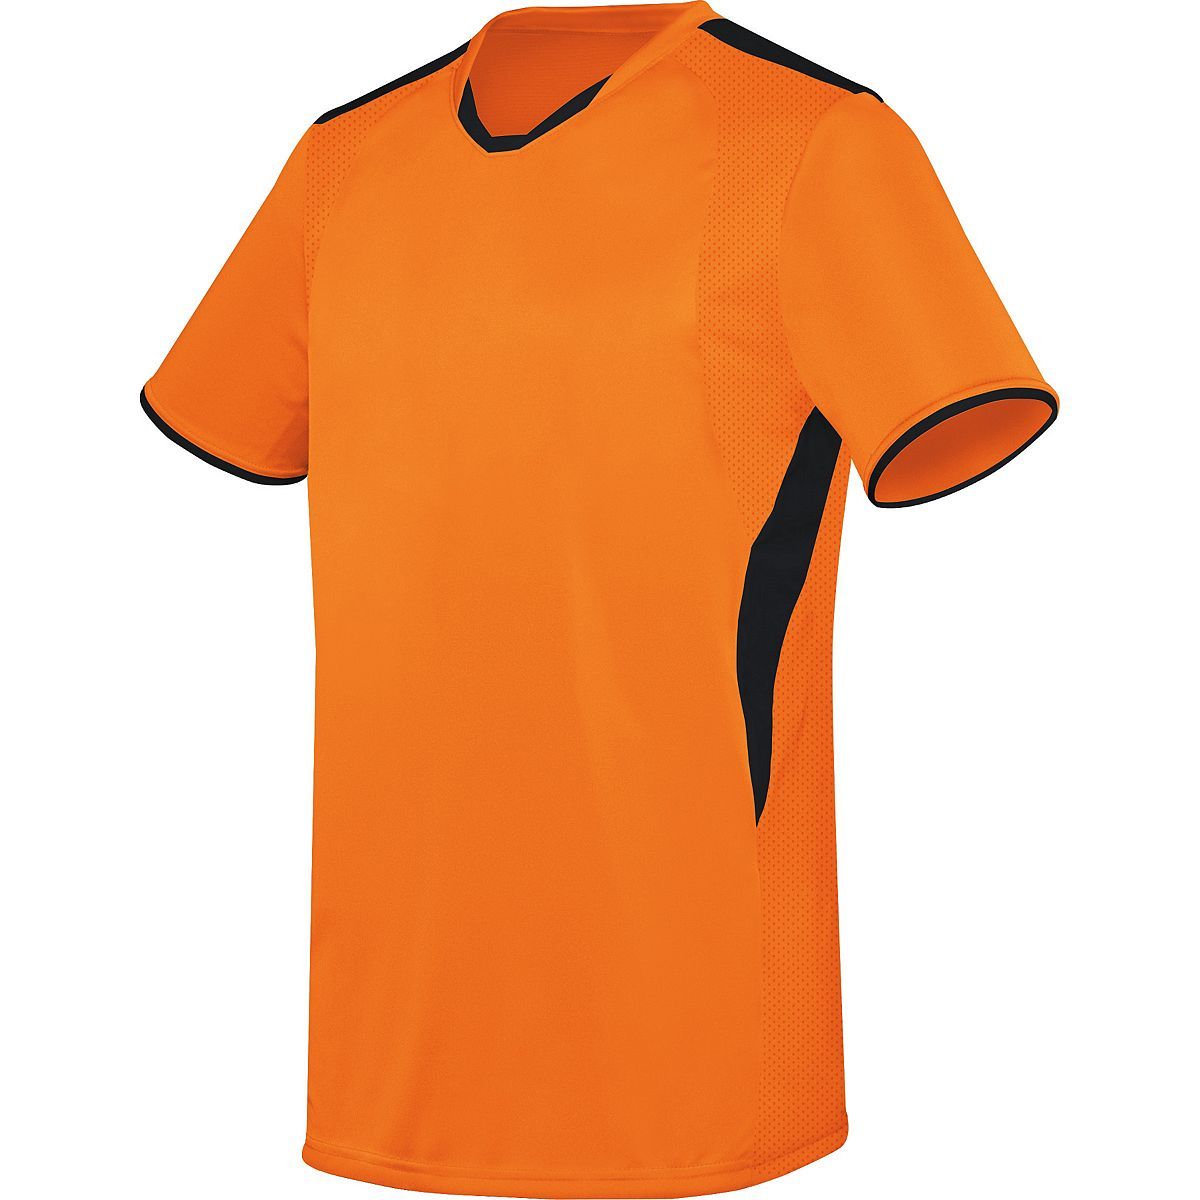 High 5 Globe Jersey in Orange/Black  -Part of the Adult, Adult-Jersey, High5-Products, Soccer, Shirts, All-Sports-1 product lines at KanaleyCreations.com